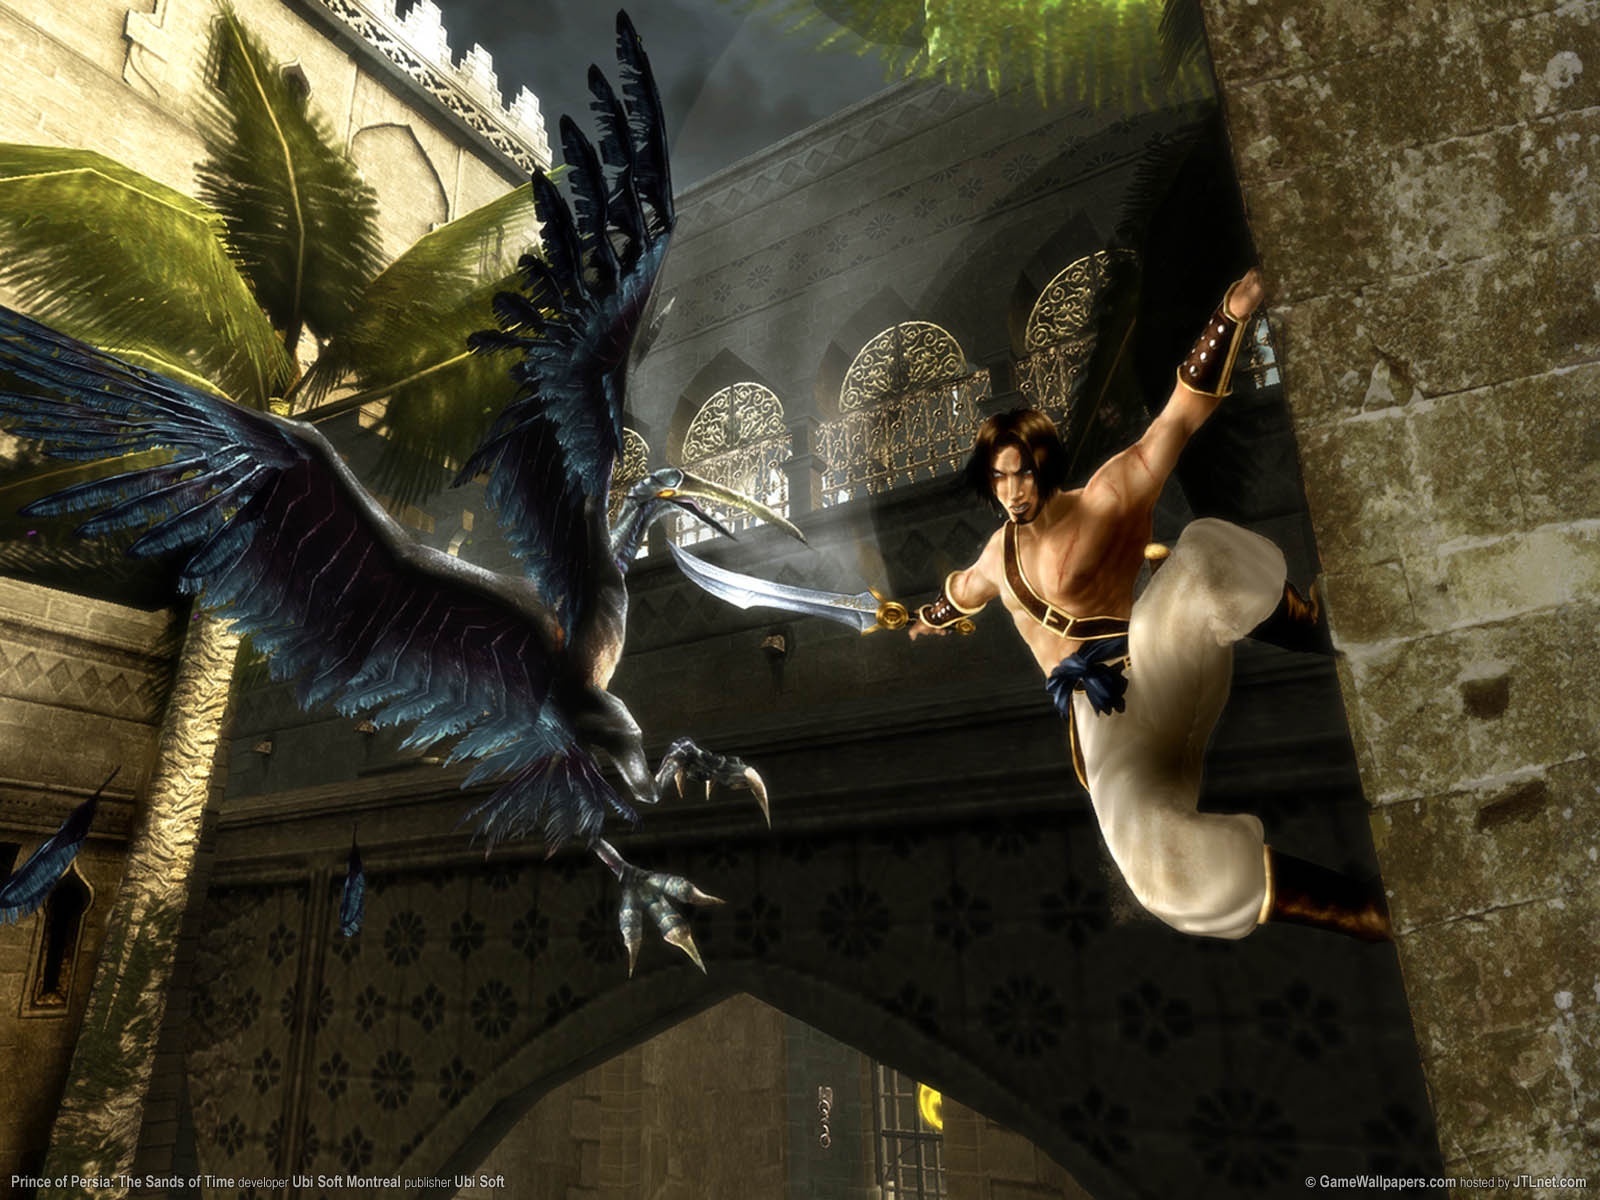 prince of persia, video game, prince of persia: the sands of time